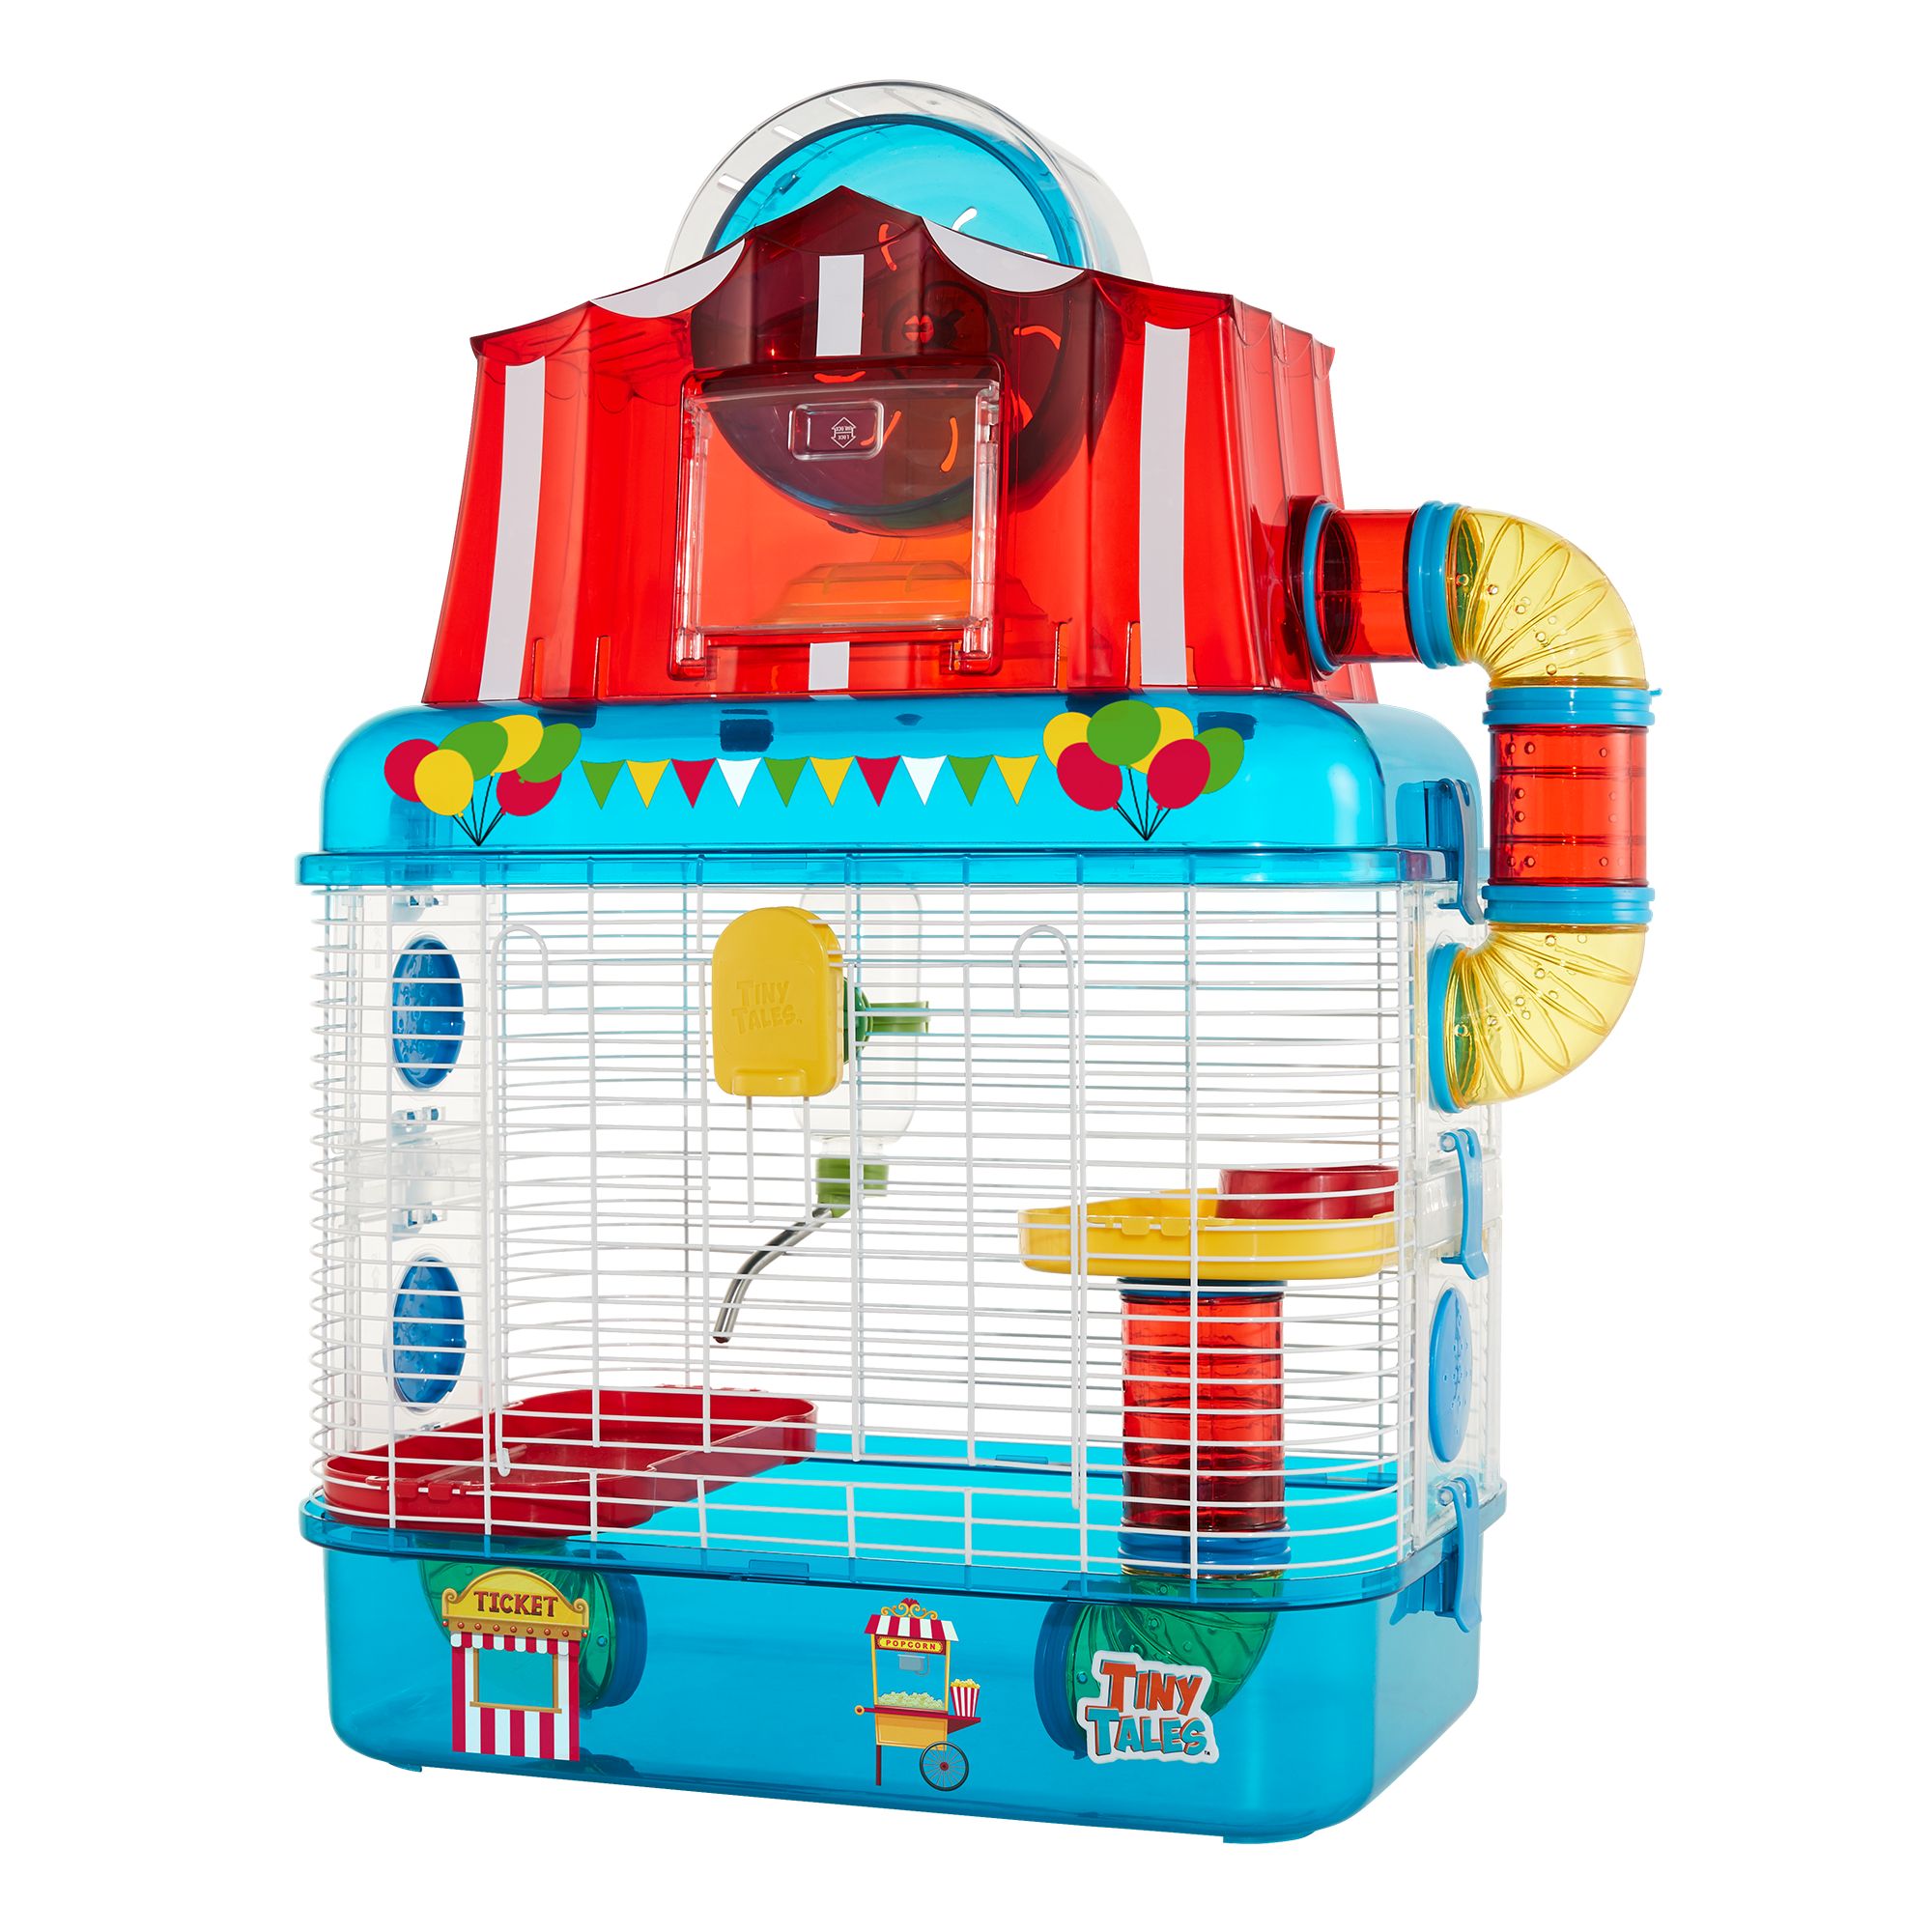 tiny tales hamster cage